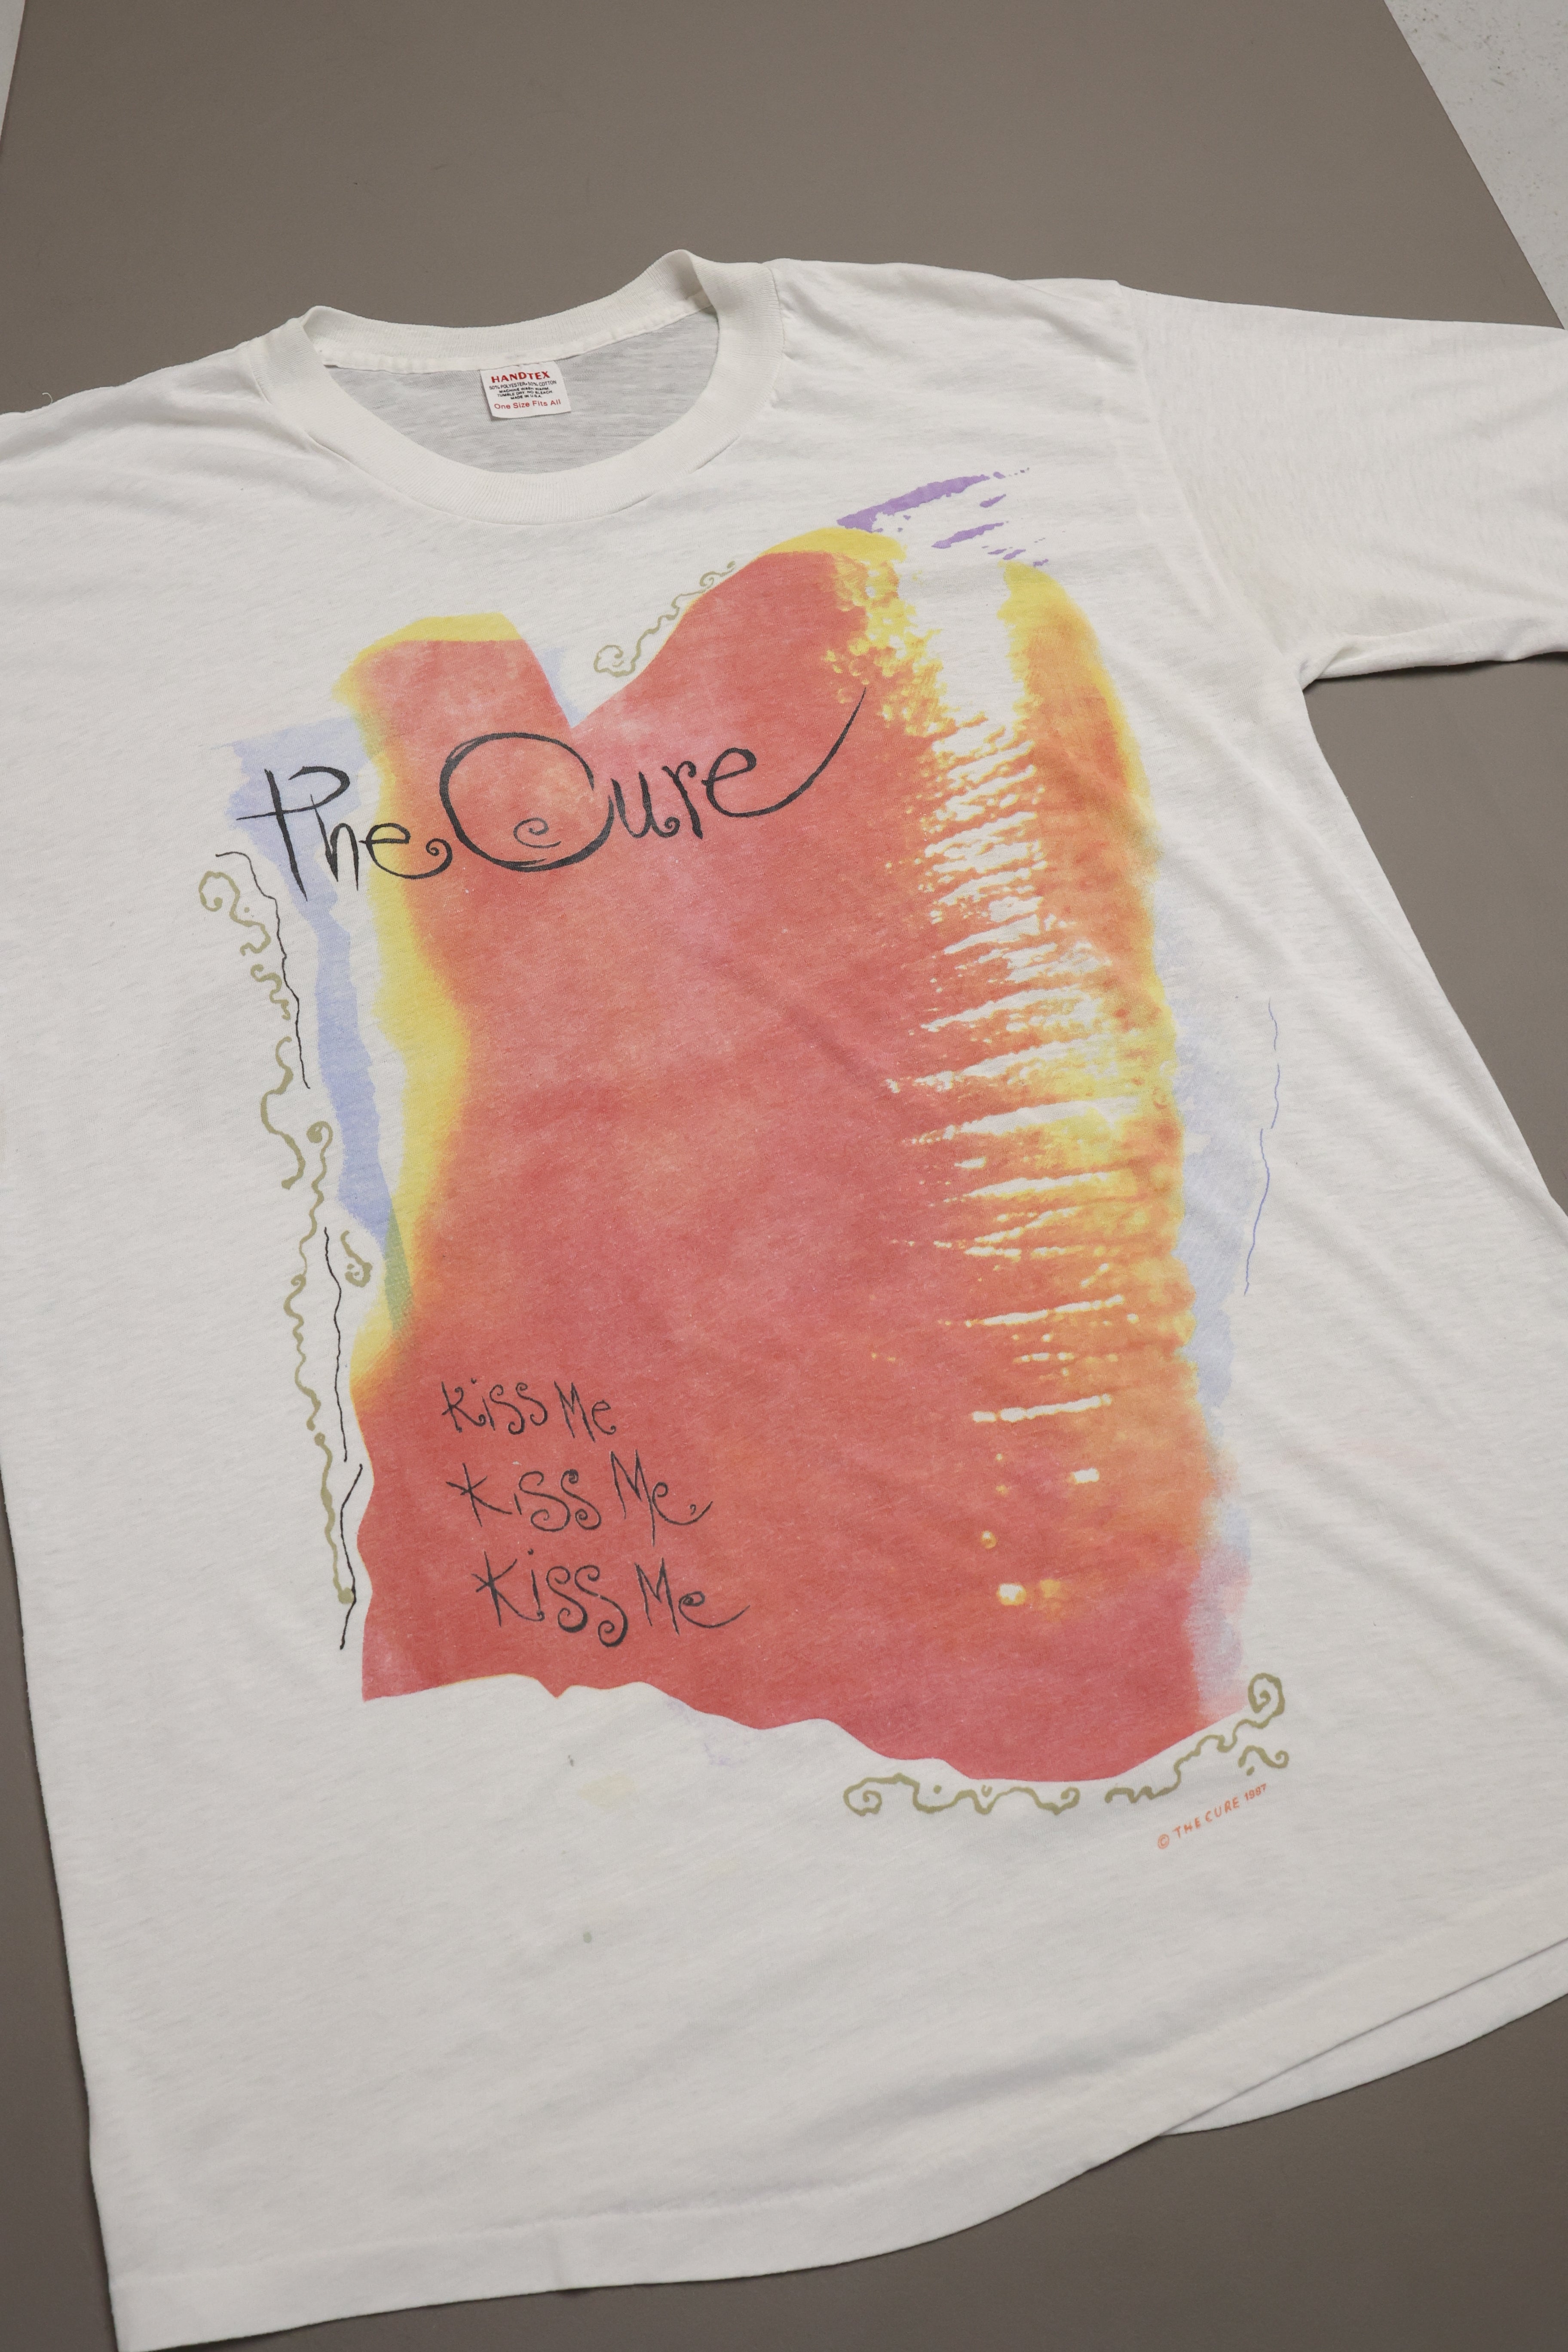 the CURE kissing tour t-shirt – temporary-tokyo